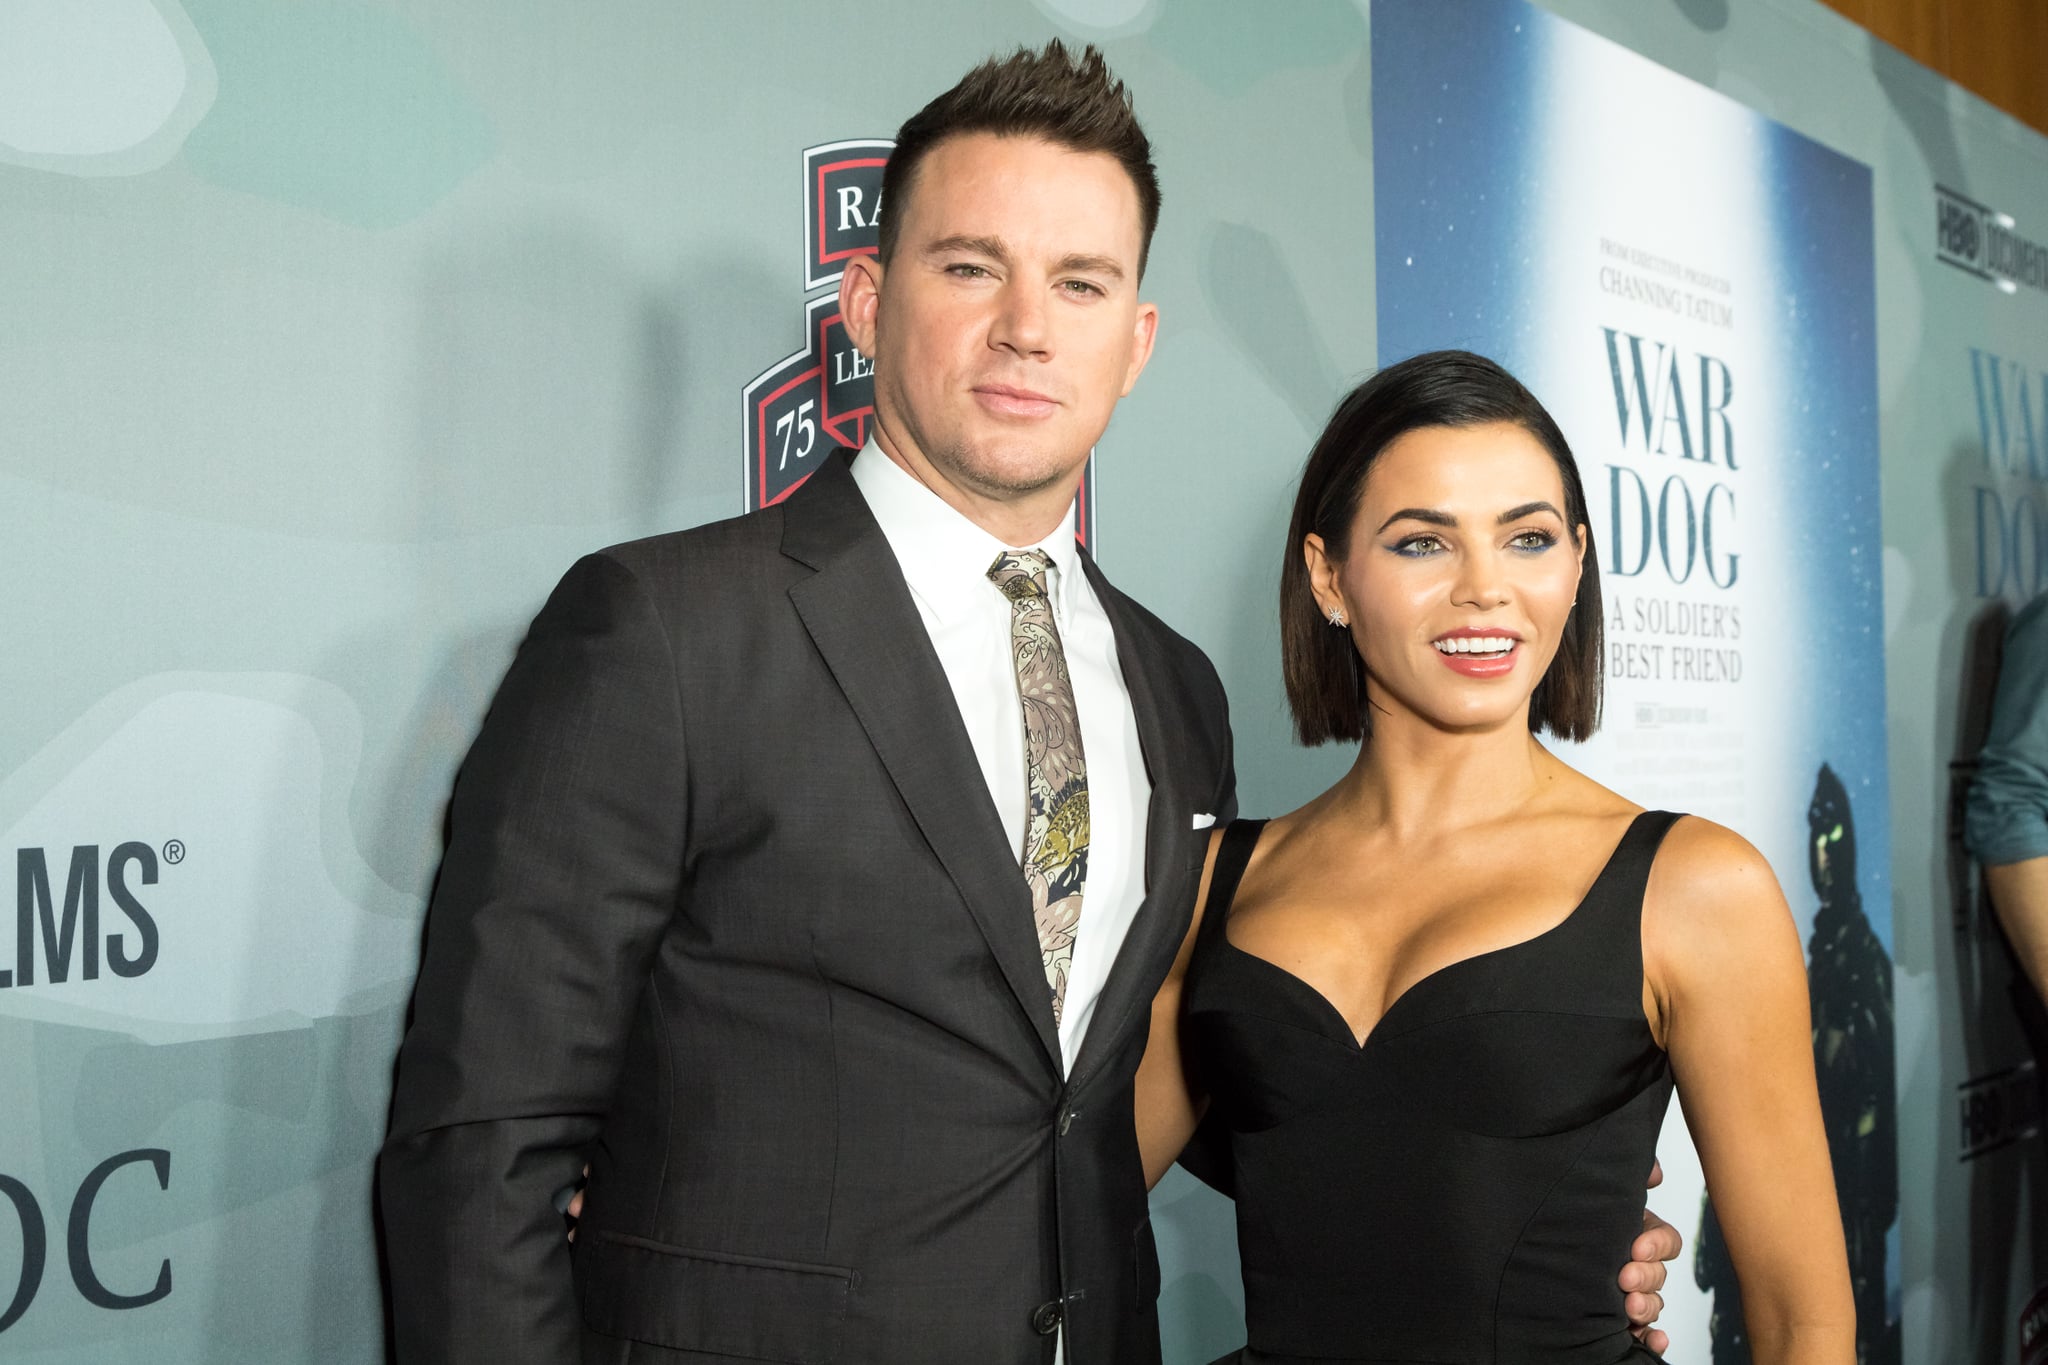 LOS ANGELES, CALIFORNIA - NOVEMBER 06:  Executive Producer Channing Tatum and wife Jenna Dewan Tatum  attend the HBO And Army Ranger Lead The Way Fun Present The Premiere Of 